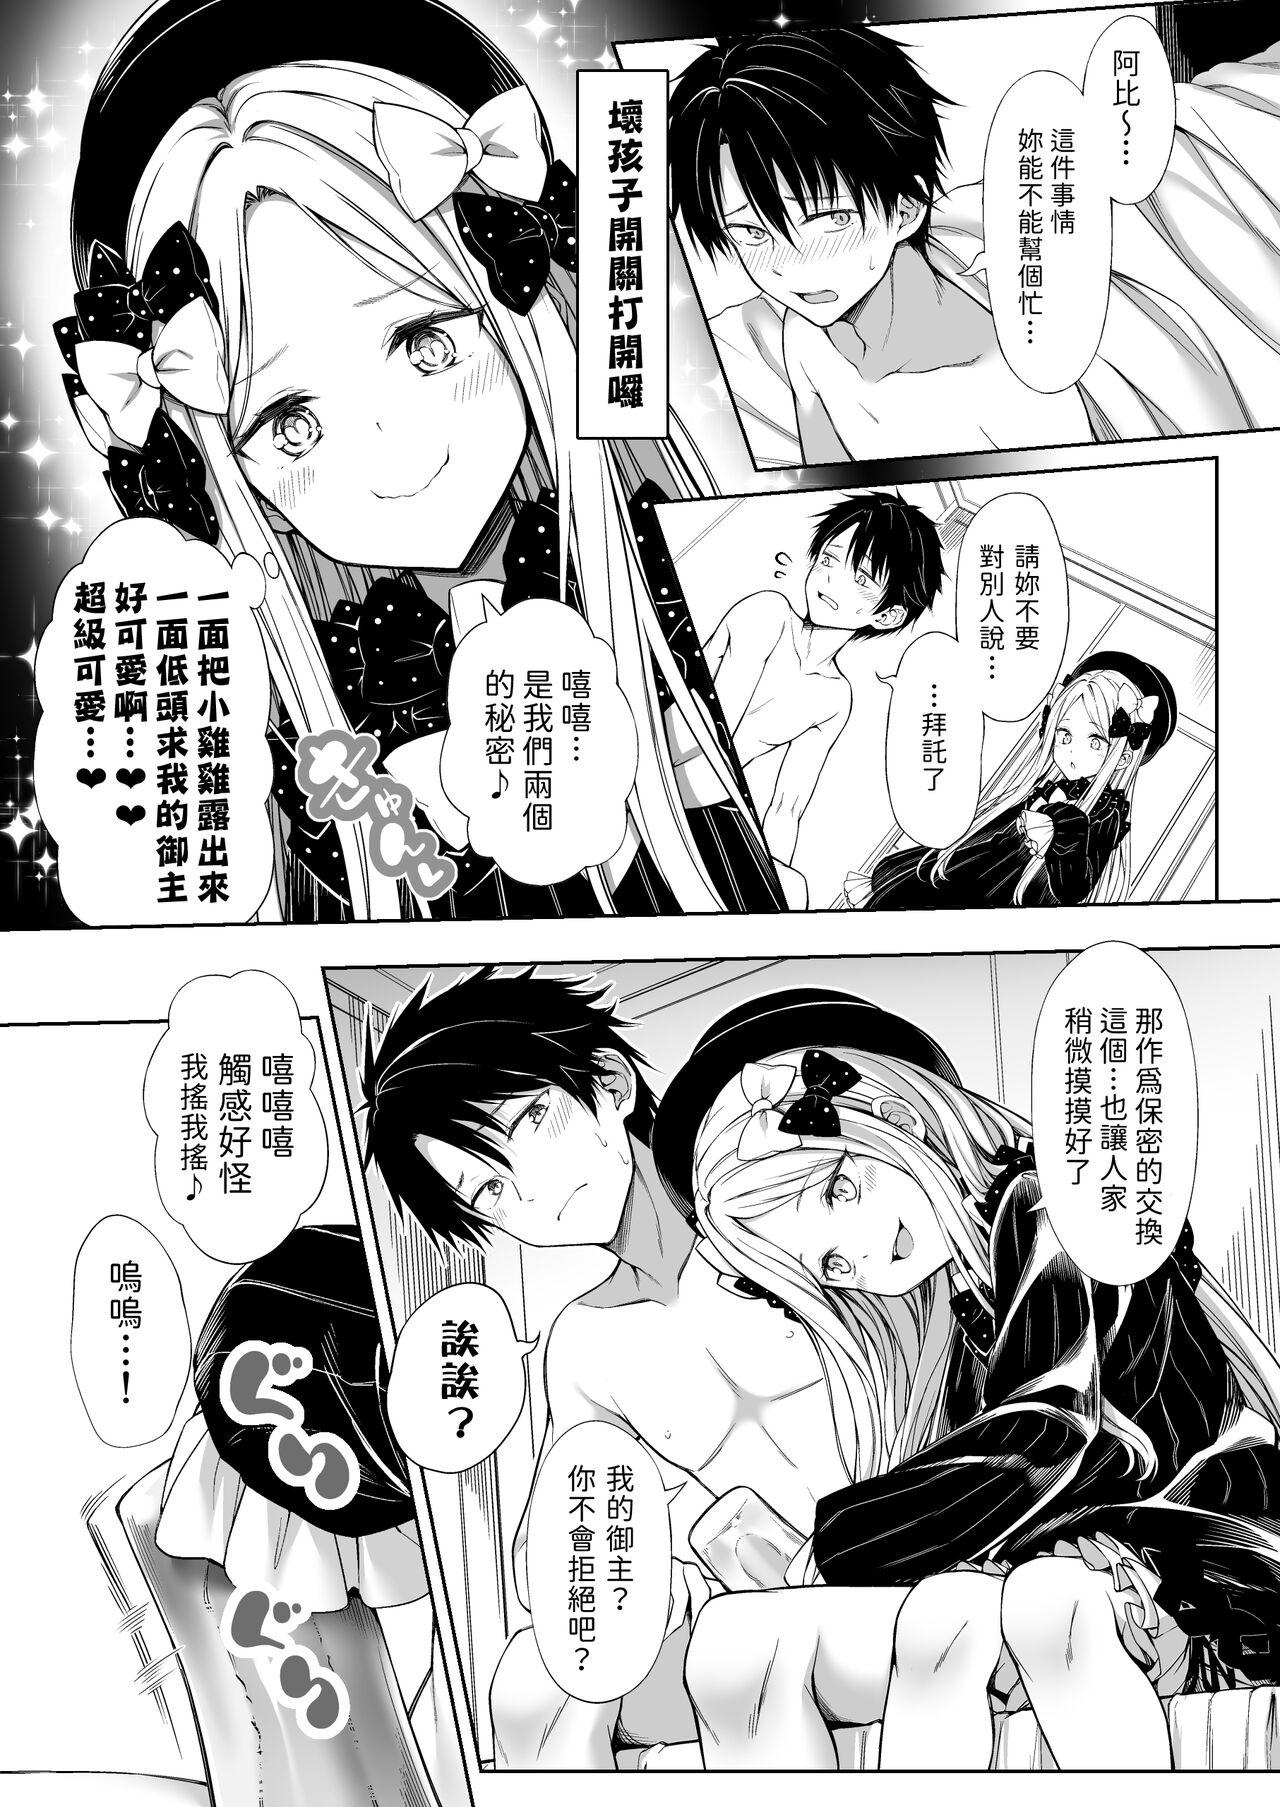 Defloration Abby-chan ni Onaho Mitsukaru hon - Fate grand order Little - Page 5